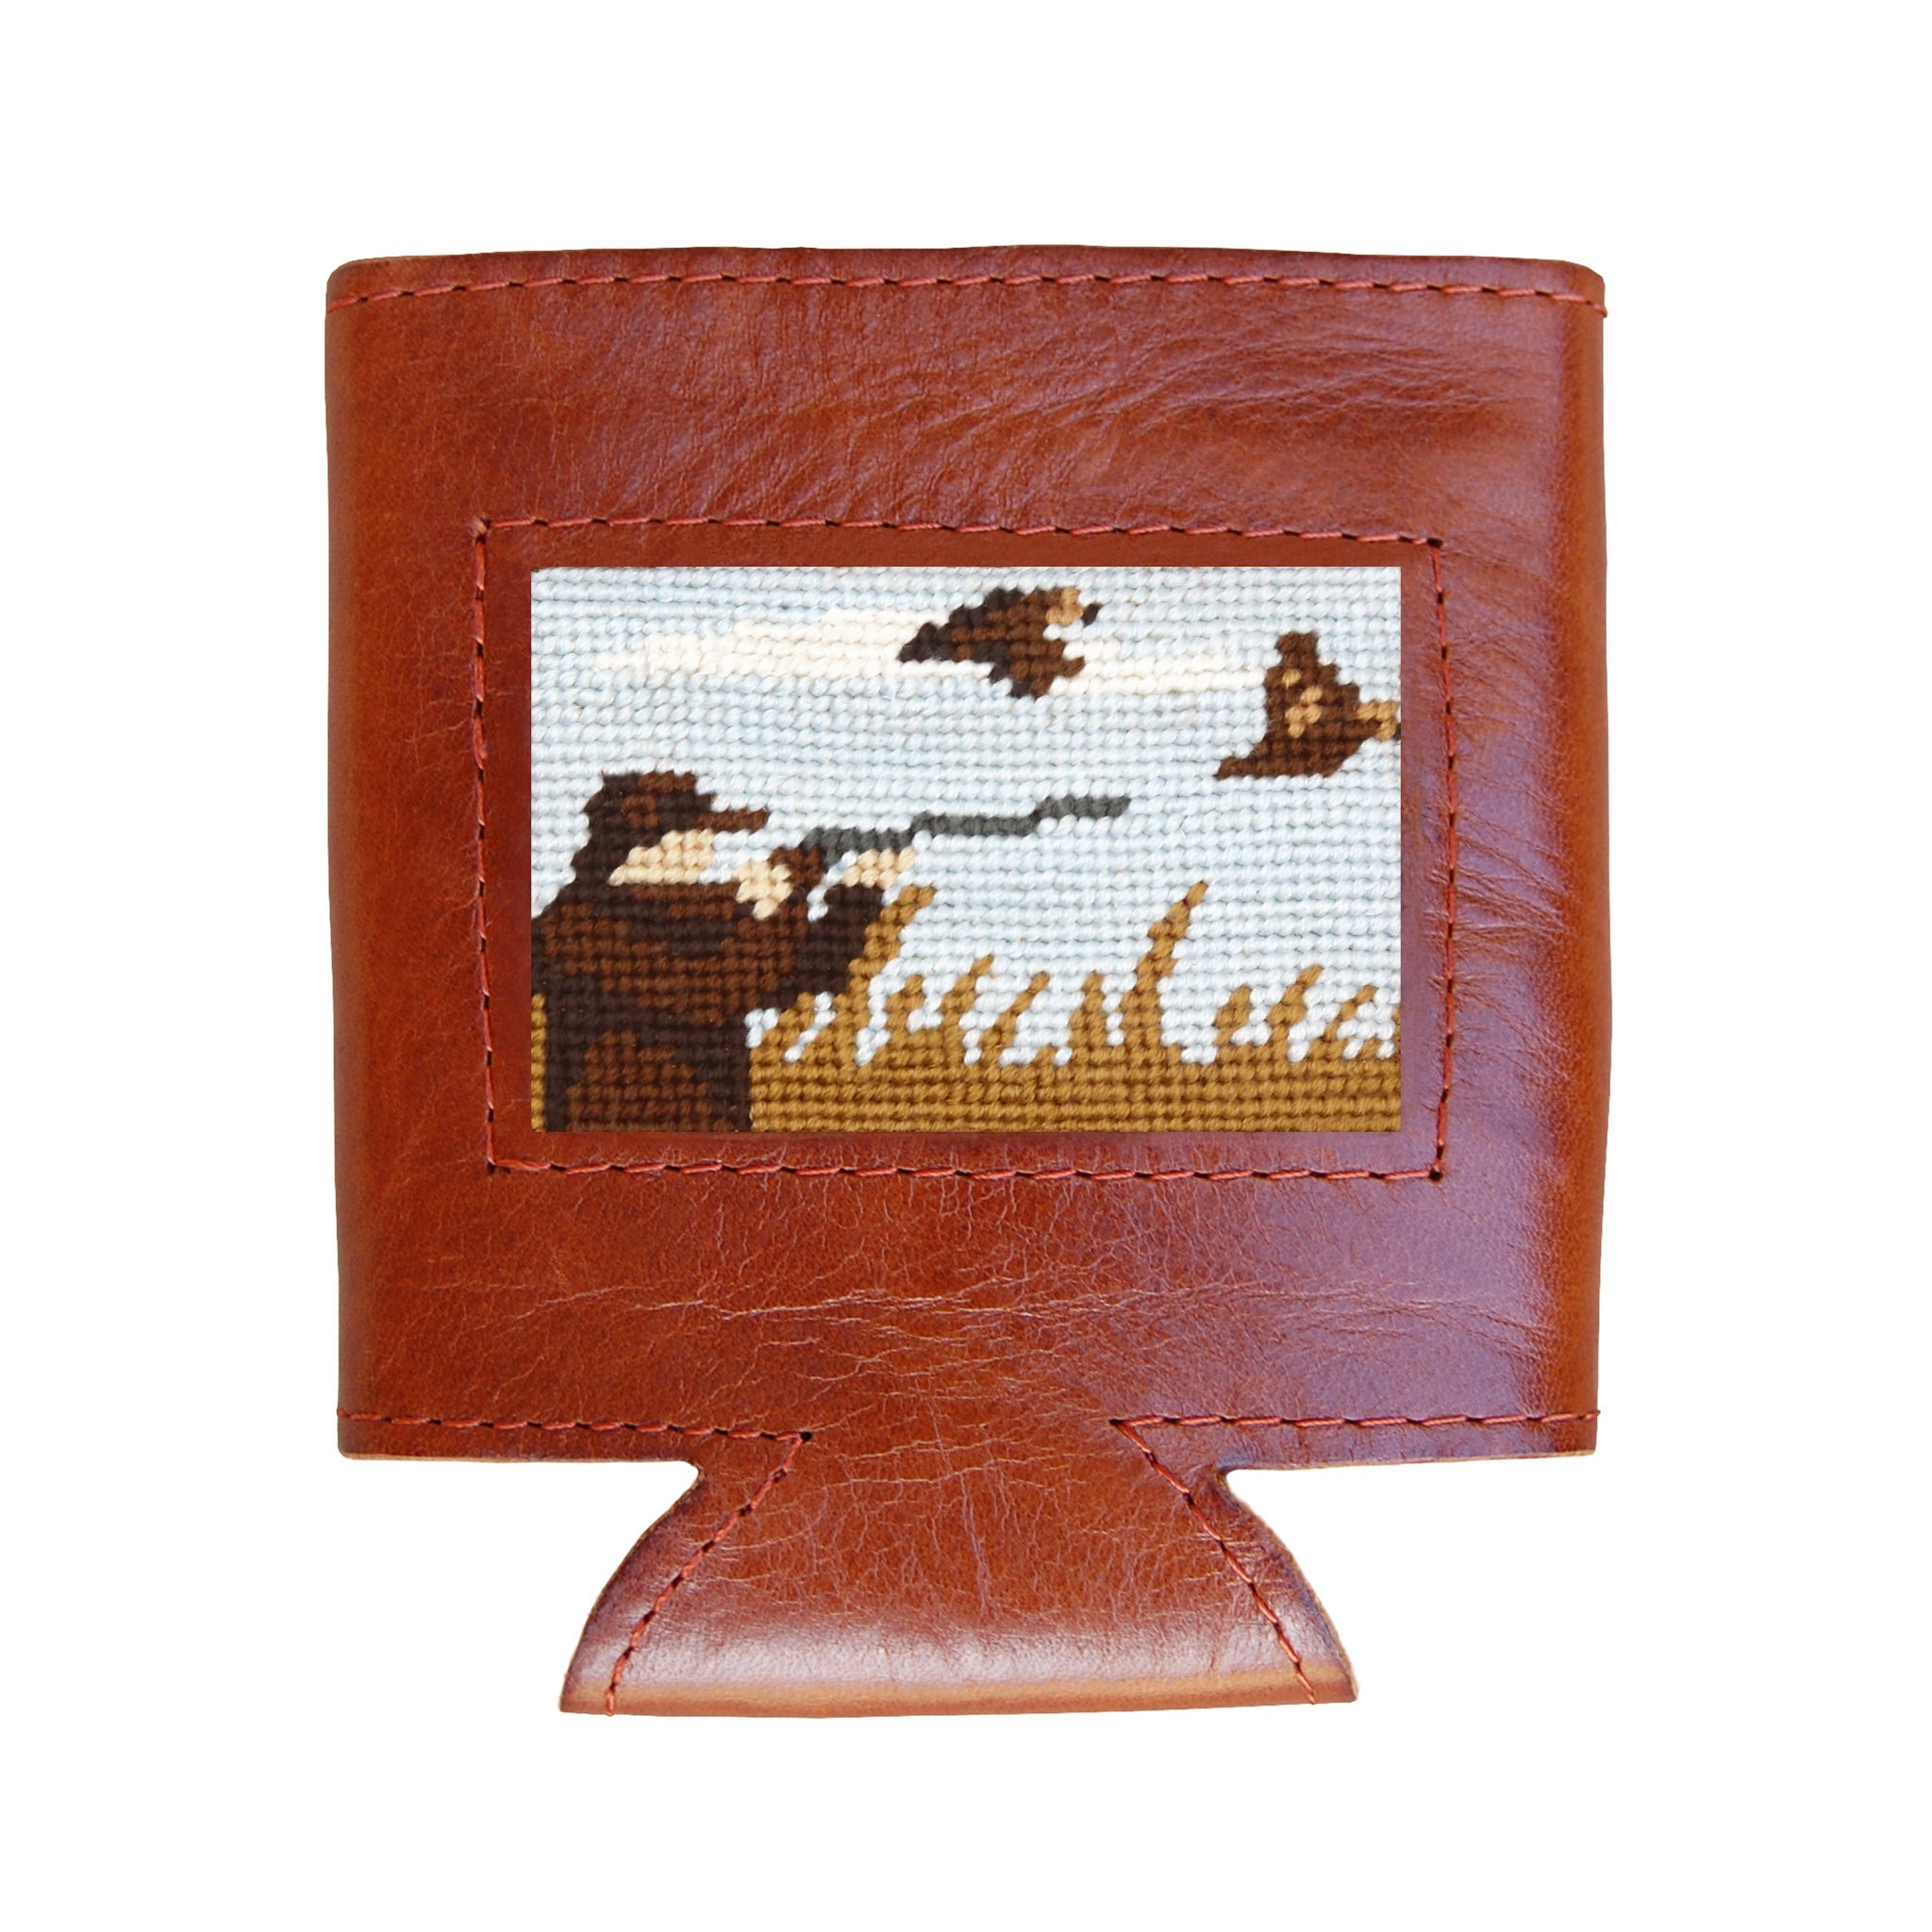 Smathers and Branson Upland Shoot Multi Needlepoint Can Cooler   